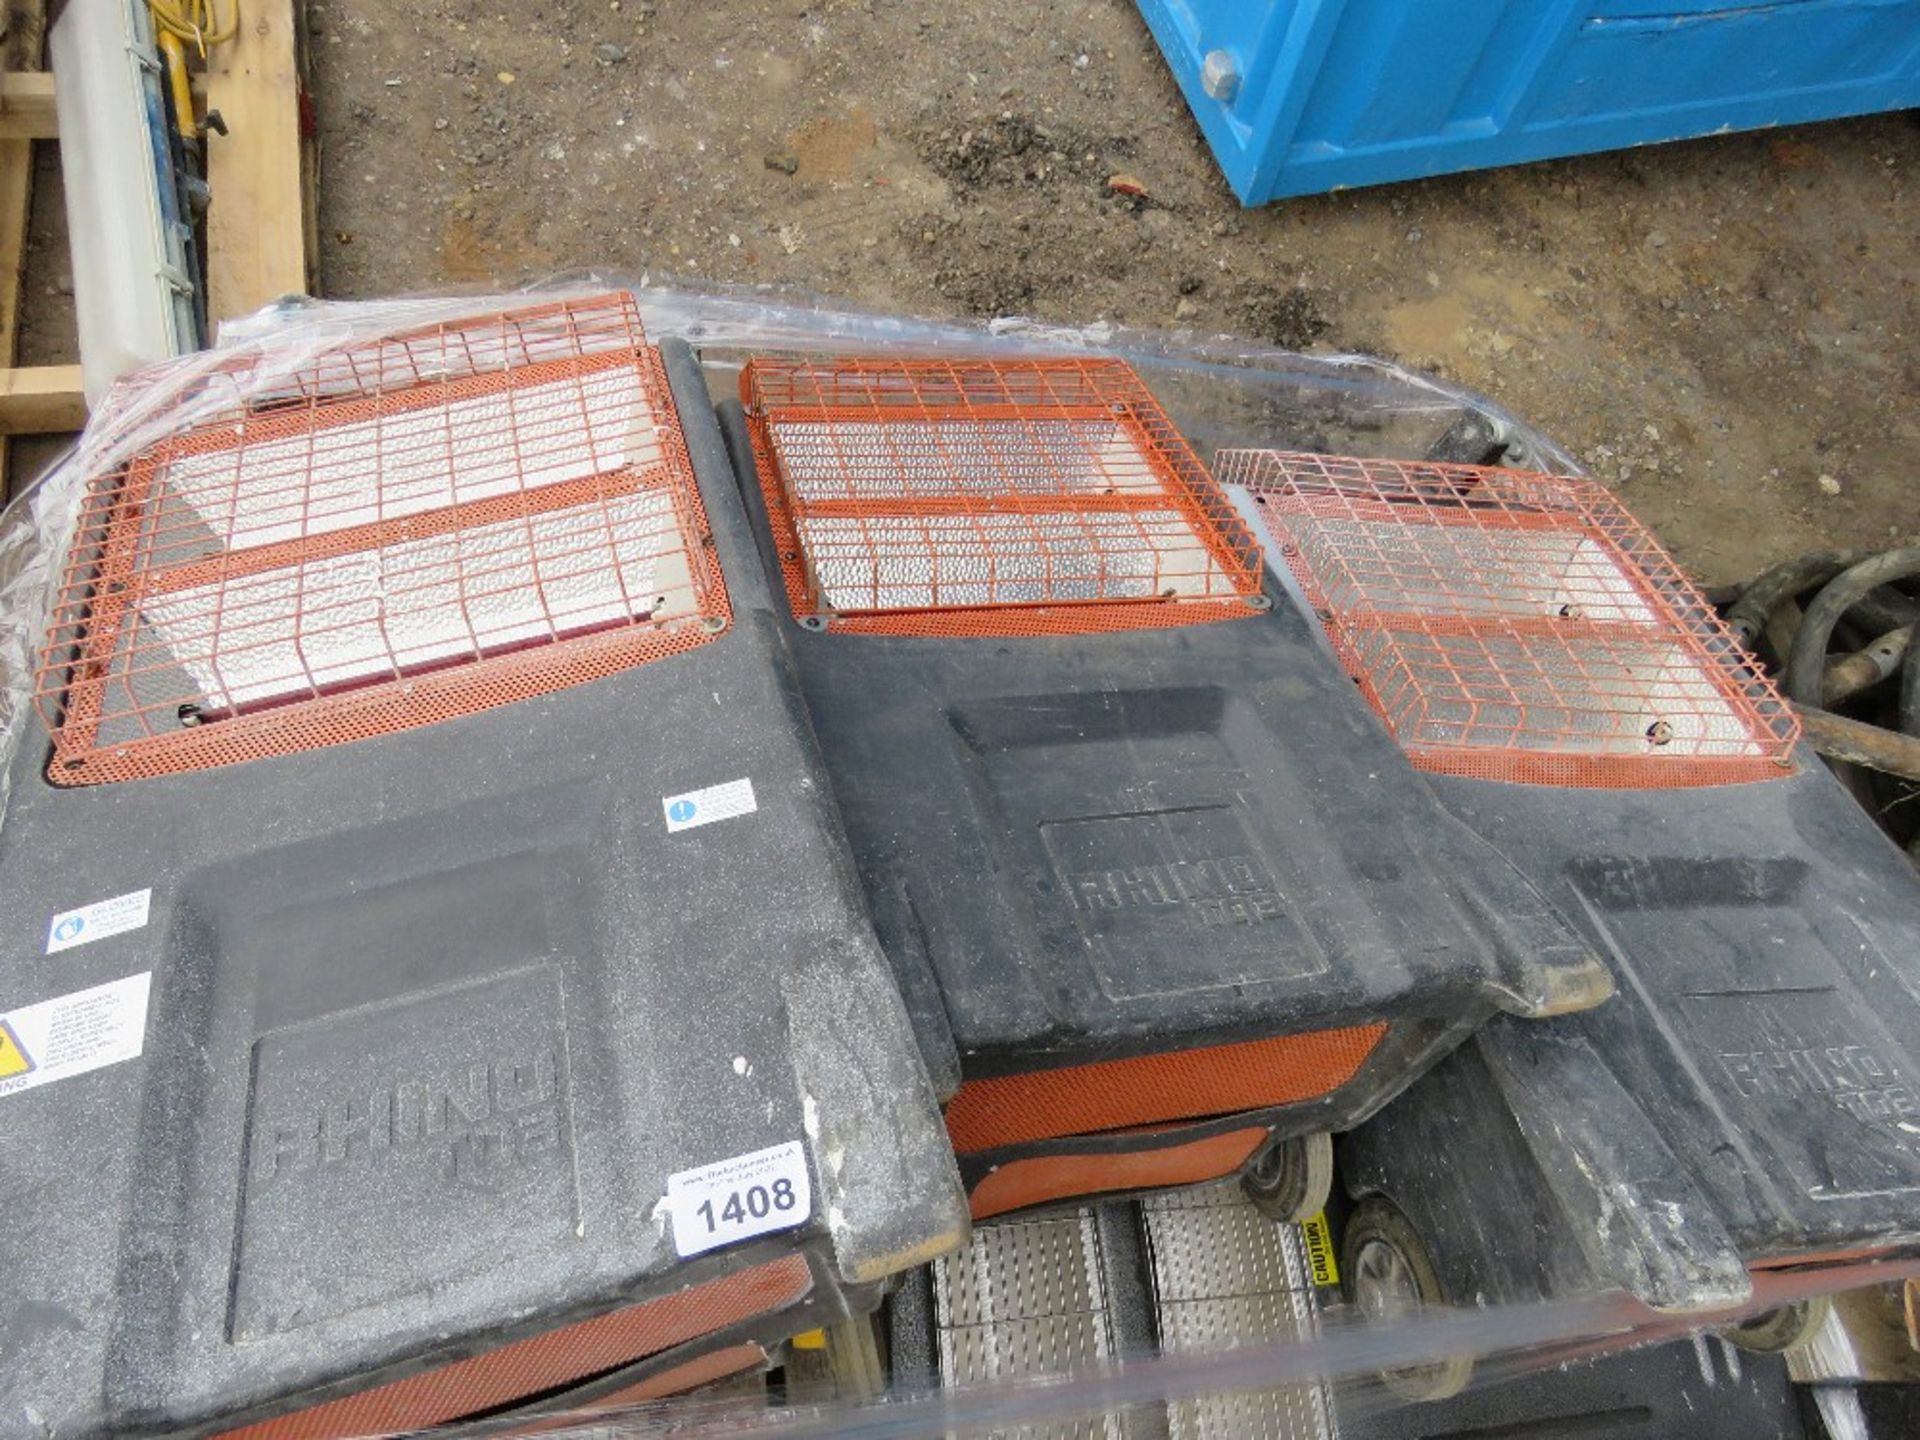 6 X RADIANT HEATERS. DIRECT FROM A LOCAL GROUNDWORKS COMPANY AS PART OF THEIR RESTRUCTURING PROGR - Image 2 of 2